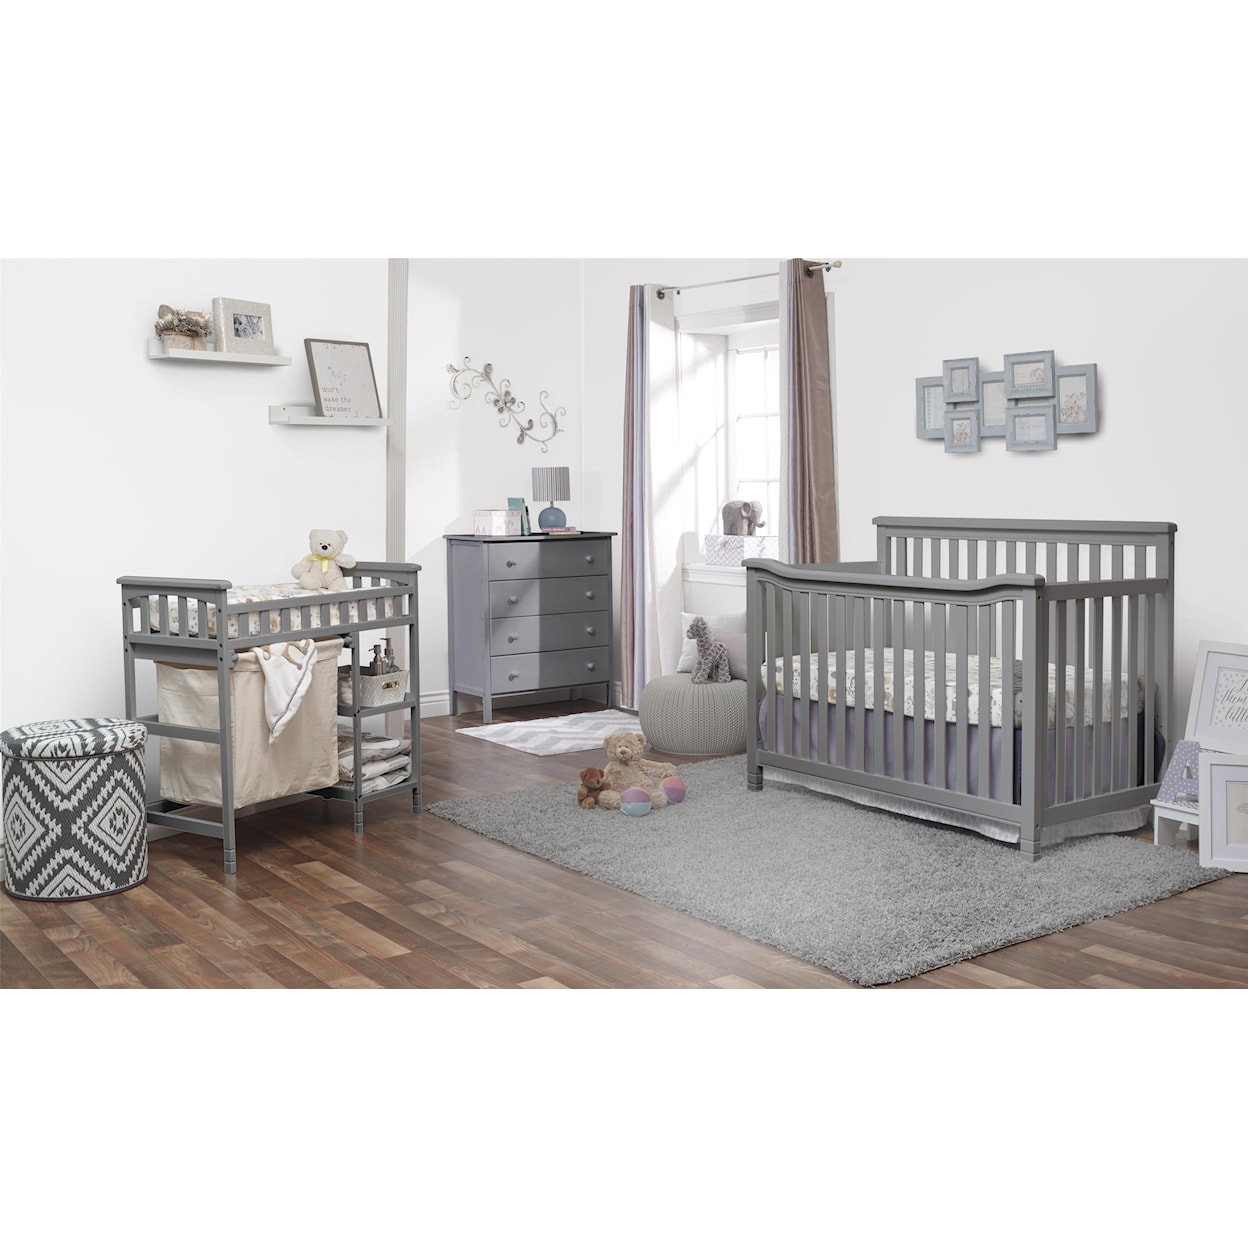 Sorelle Furniture Palisades Gray 3pc Baby's Room in a Box